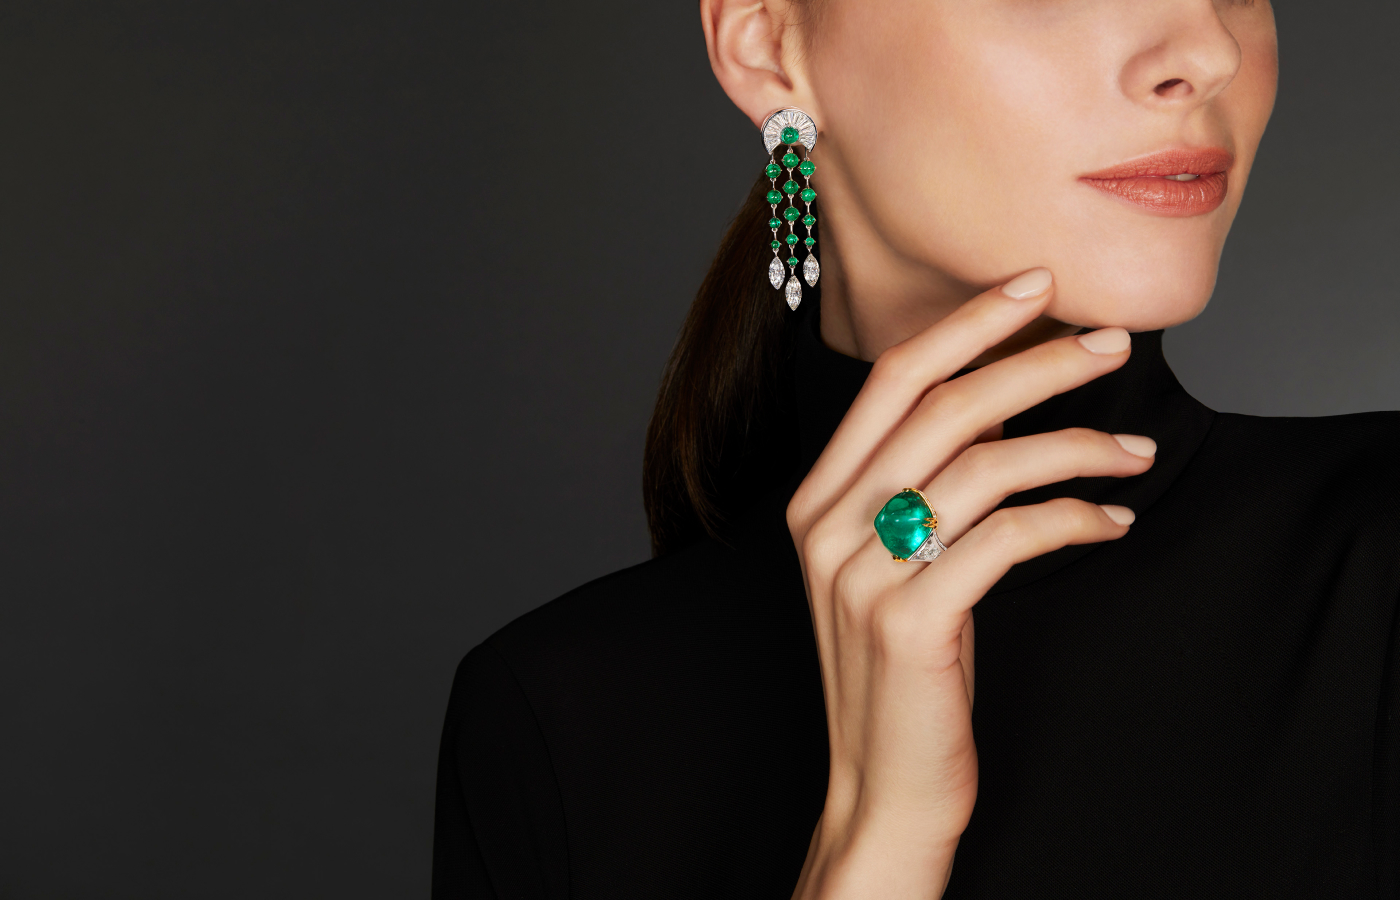 Ronald Abram Emerald Droplet earrings and a 22.88 carat cabochon Colombian emerald ring 